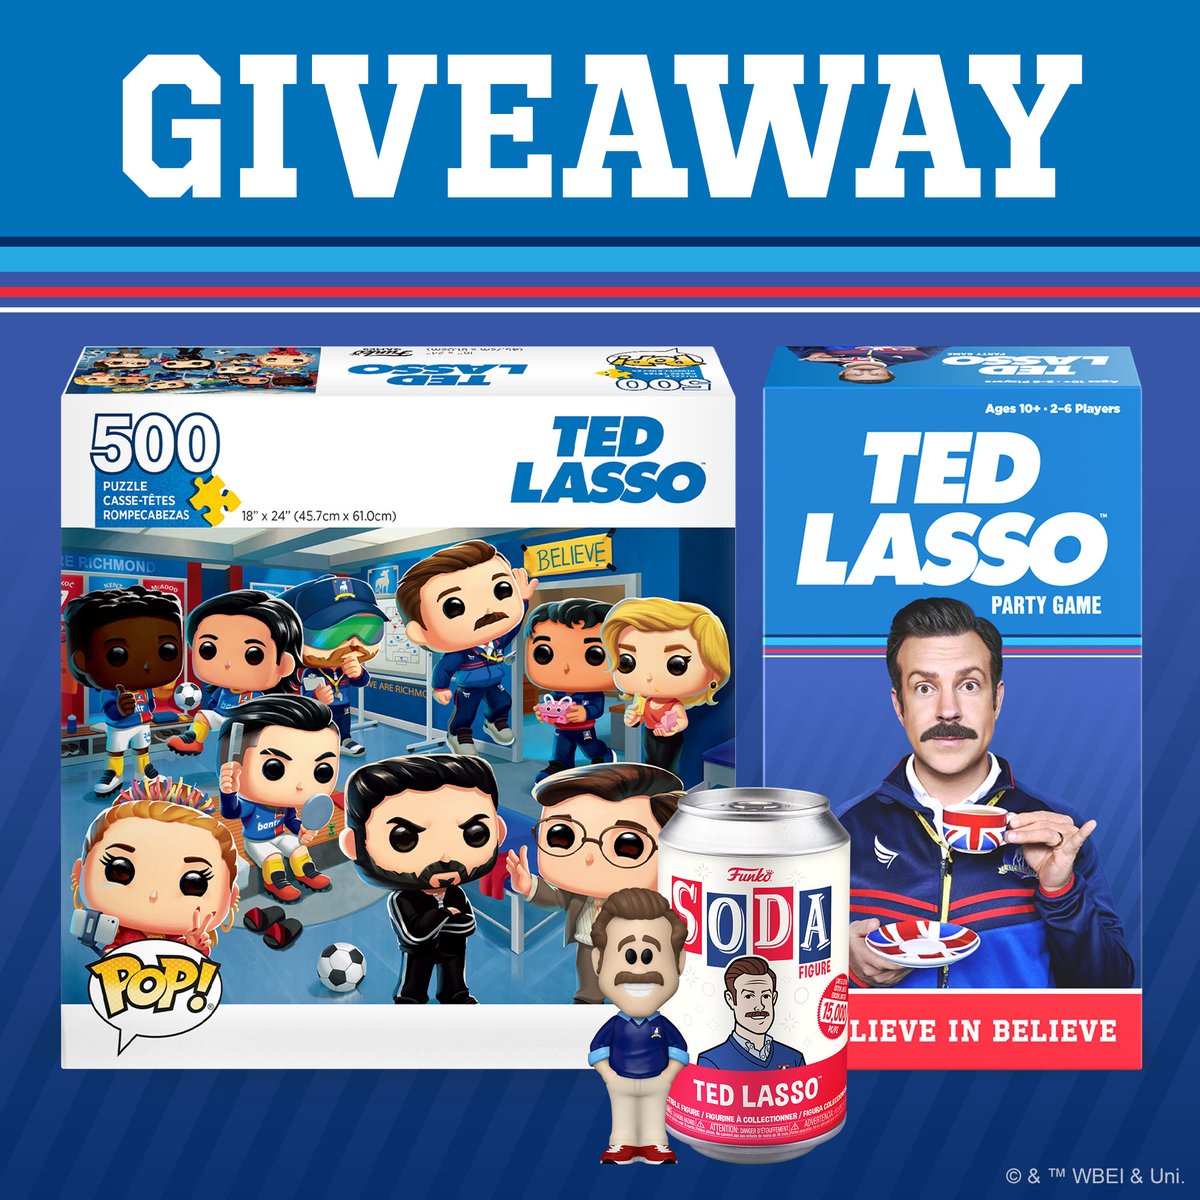 Believe in Believe! RT and follow @FunkoGames AND @OriginalFunko for the chance to WIN a Ted Lasso SODA, Ted Lasso Pop! Puzzle, and Ted Lasso Party Game! #TedLasso #RichmondTillWeDie